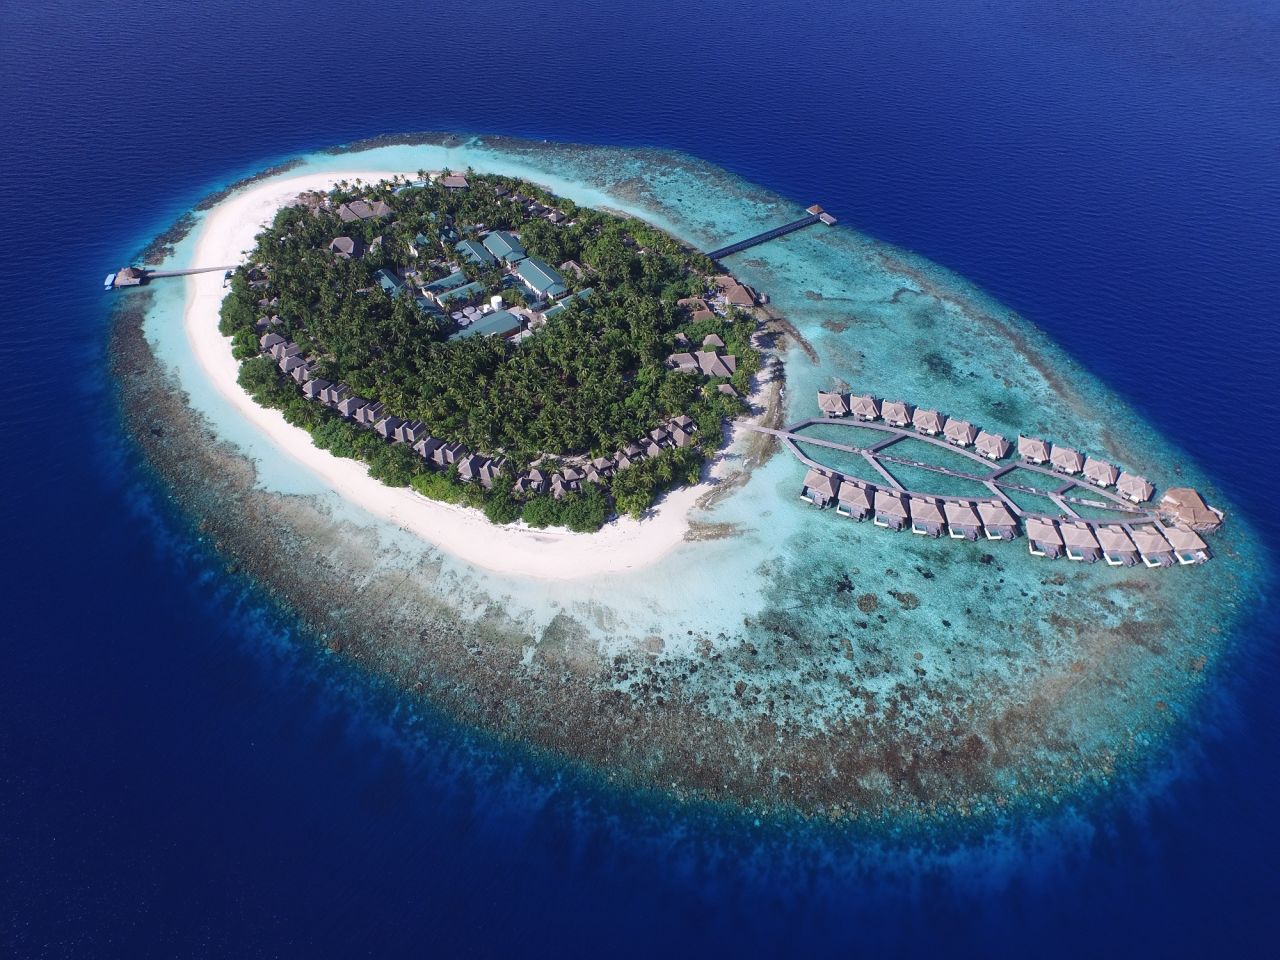 Maldives-style luxury beach resorts could be on their way to Saudi Arabia. 